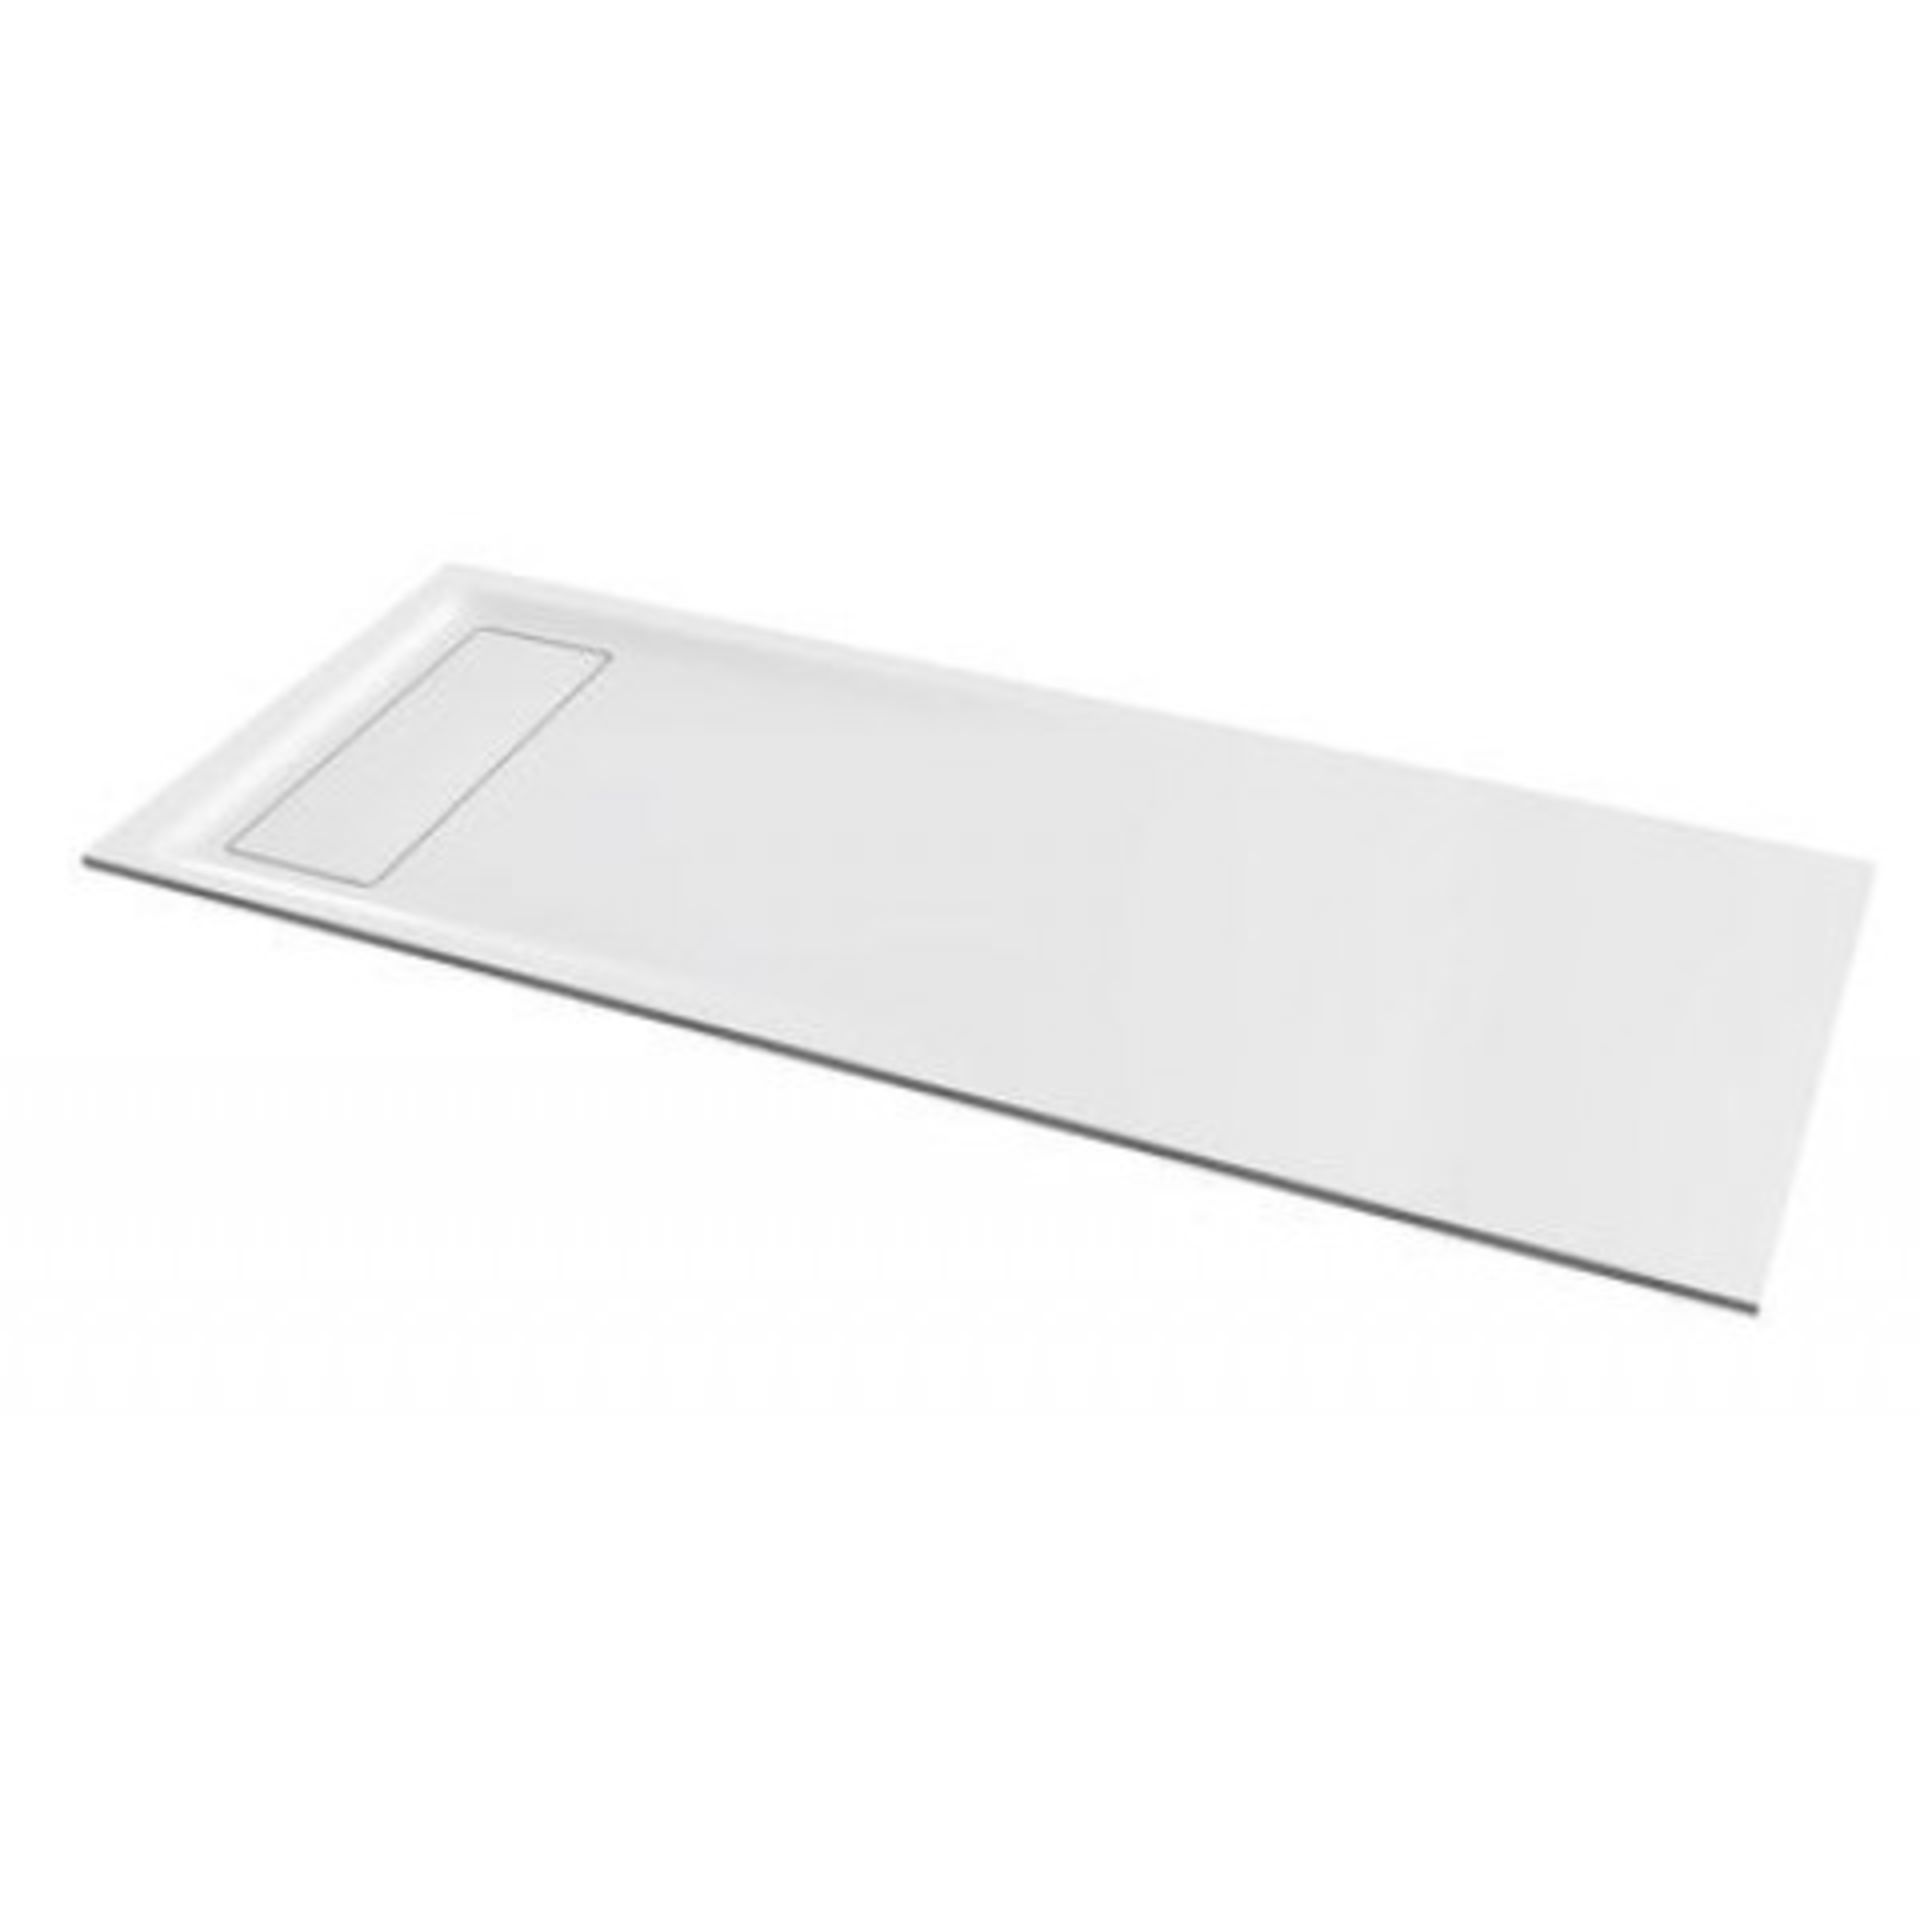 (VD146) Keramag 1400x900mm Opale White Shower Tray. RRP £1,285.99.Opale is sober, slender and... - Bild 4 aus 4